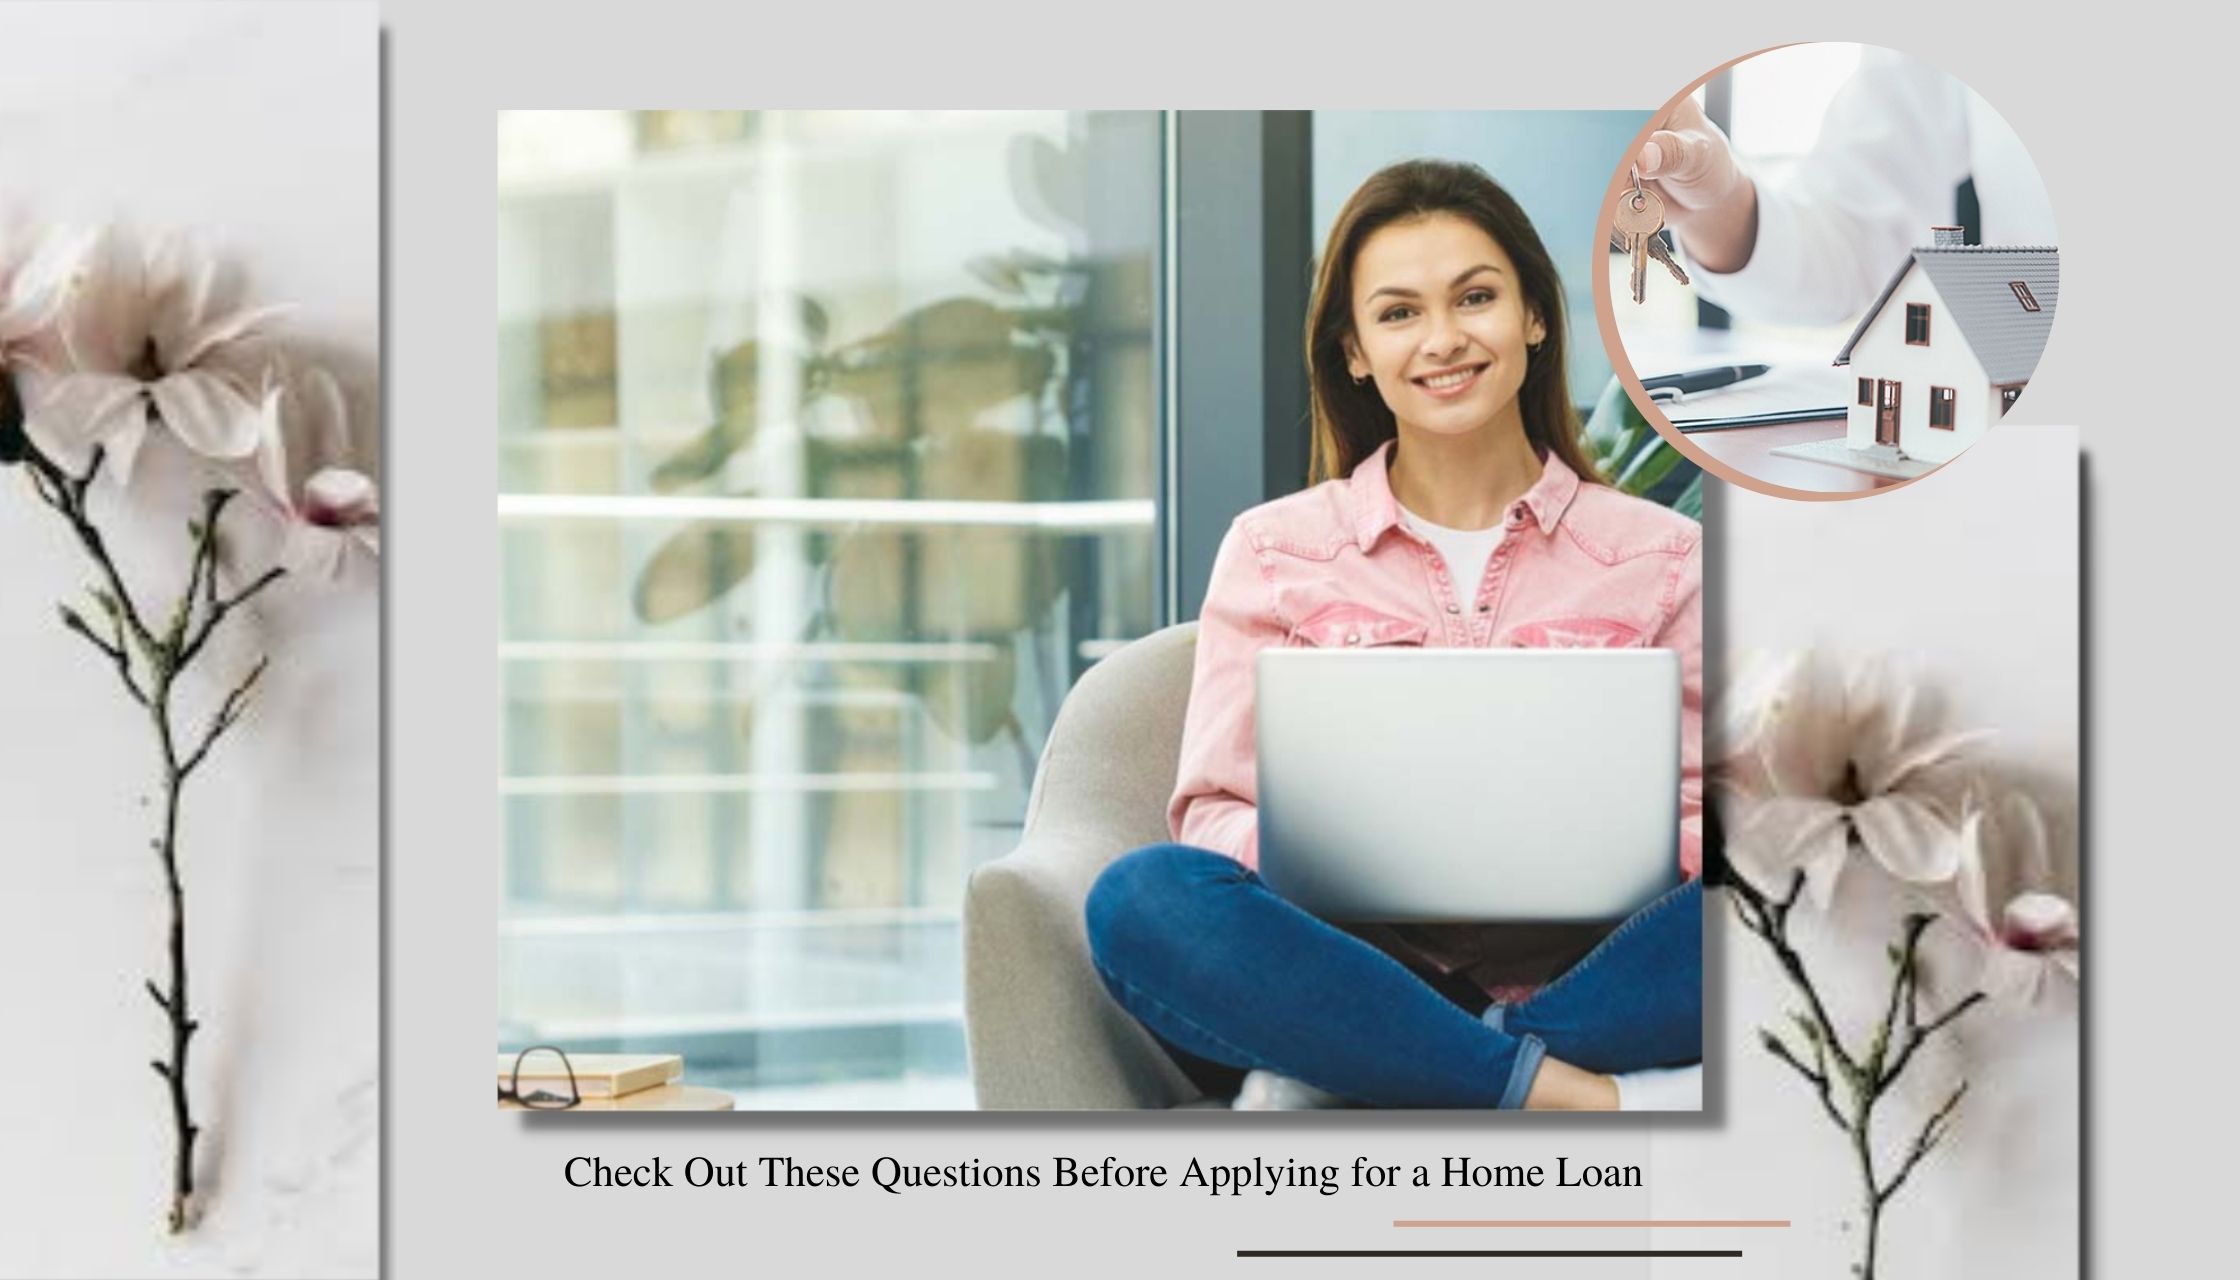 Check Out These Questions Before Applying for a Home Loan